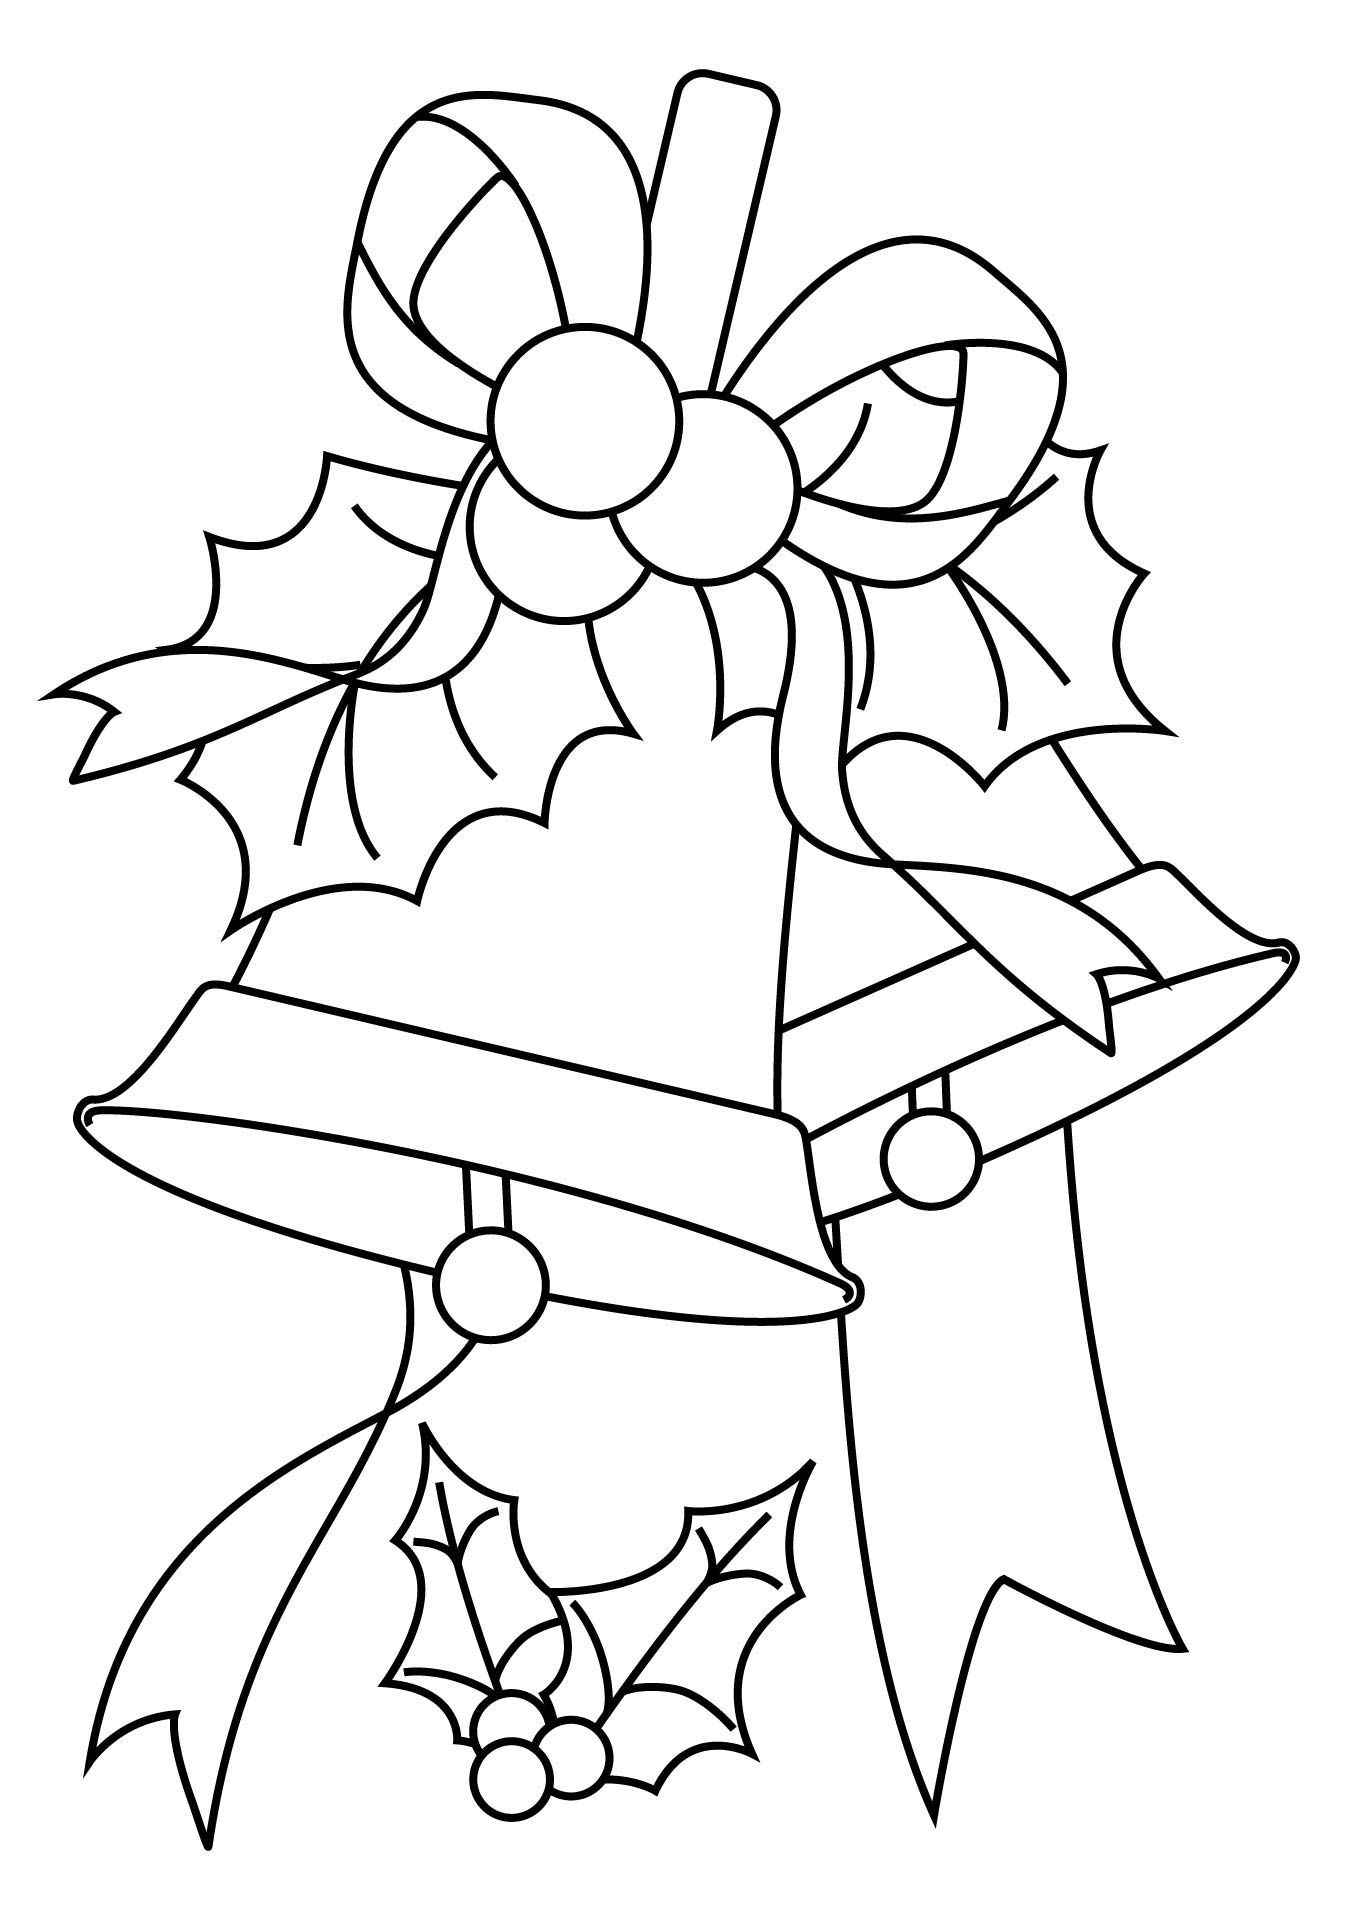 Printable Coloring Page Template Christmas Bells